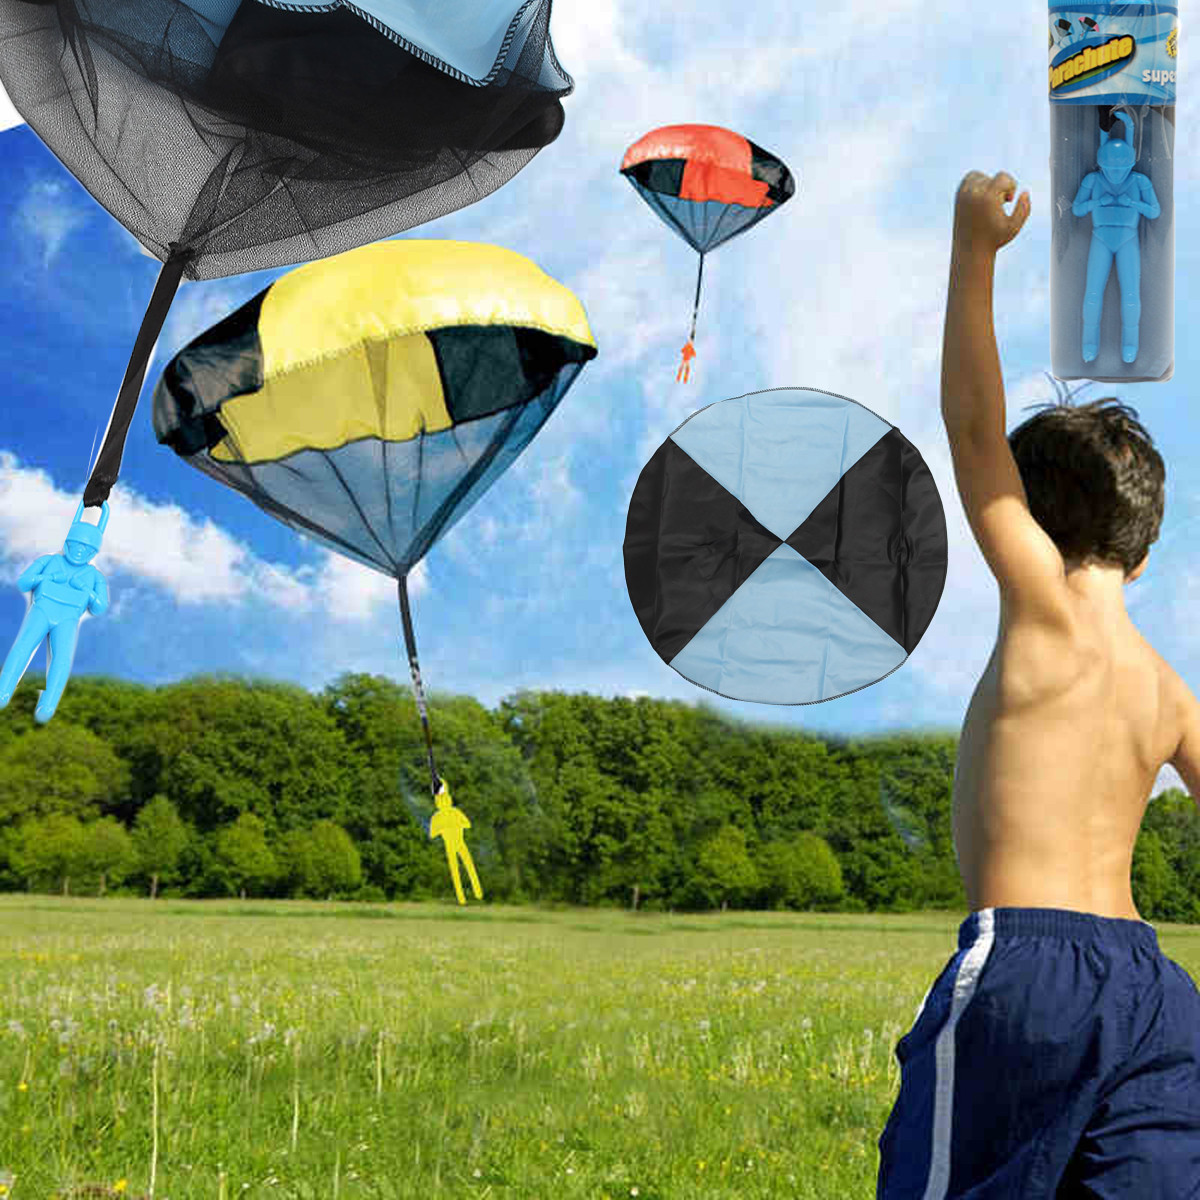 Kids-Hand-Throwing-Parachute-Kite-Outdoor-Play-Game-Toy-1021887-2